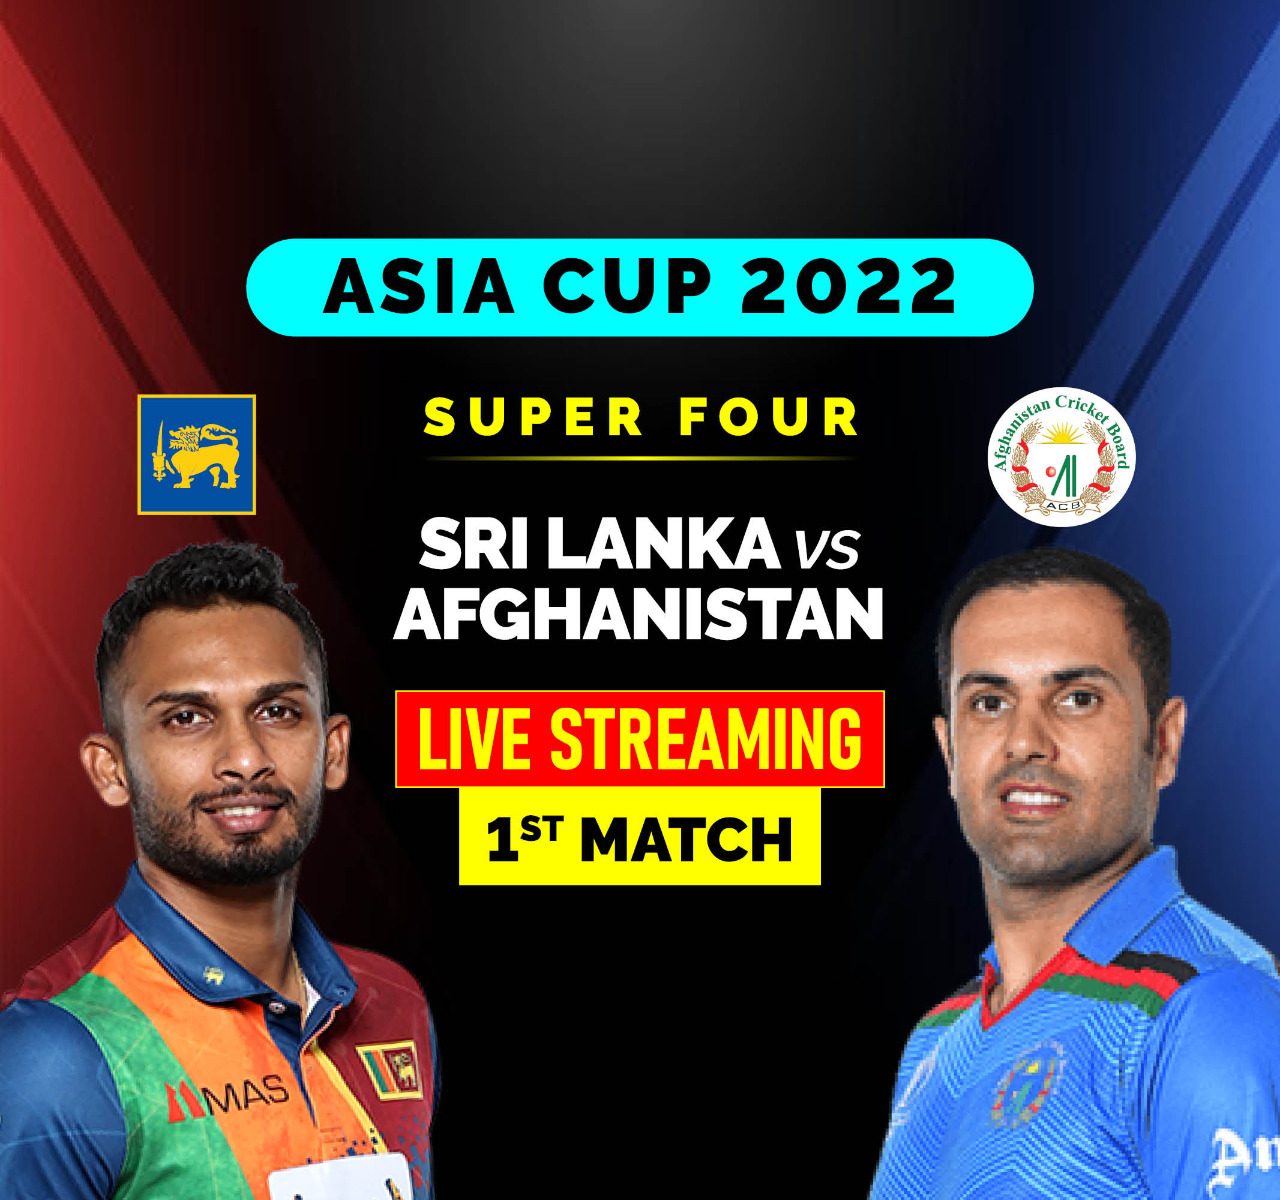 Sri Lanka vs Afghanistan Live Streaming Cricket, Super Four Match When And Where to Watch SL vs AFG Asia Cup 2022 Coverage on TV And Online